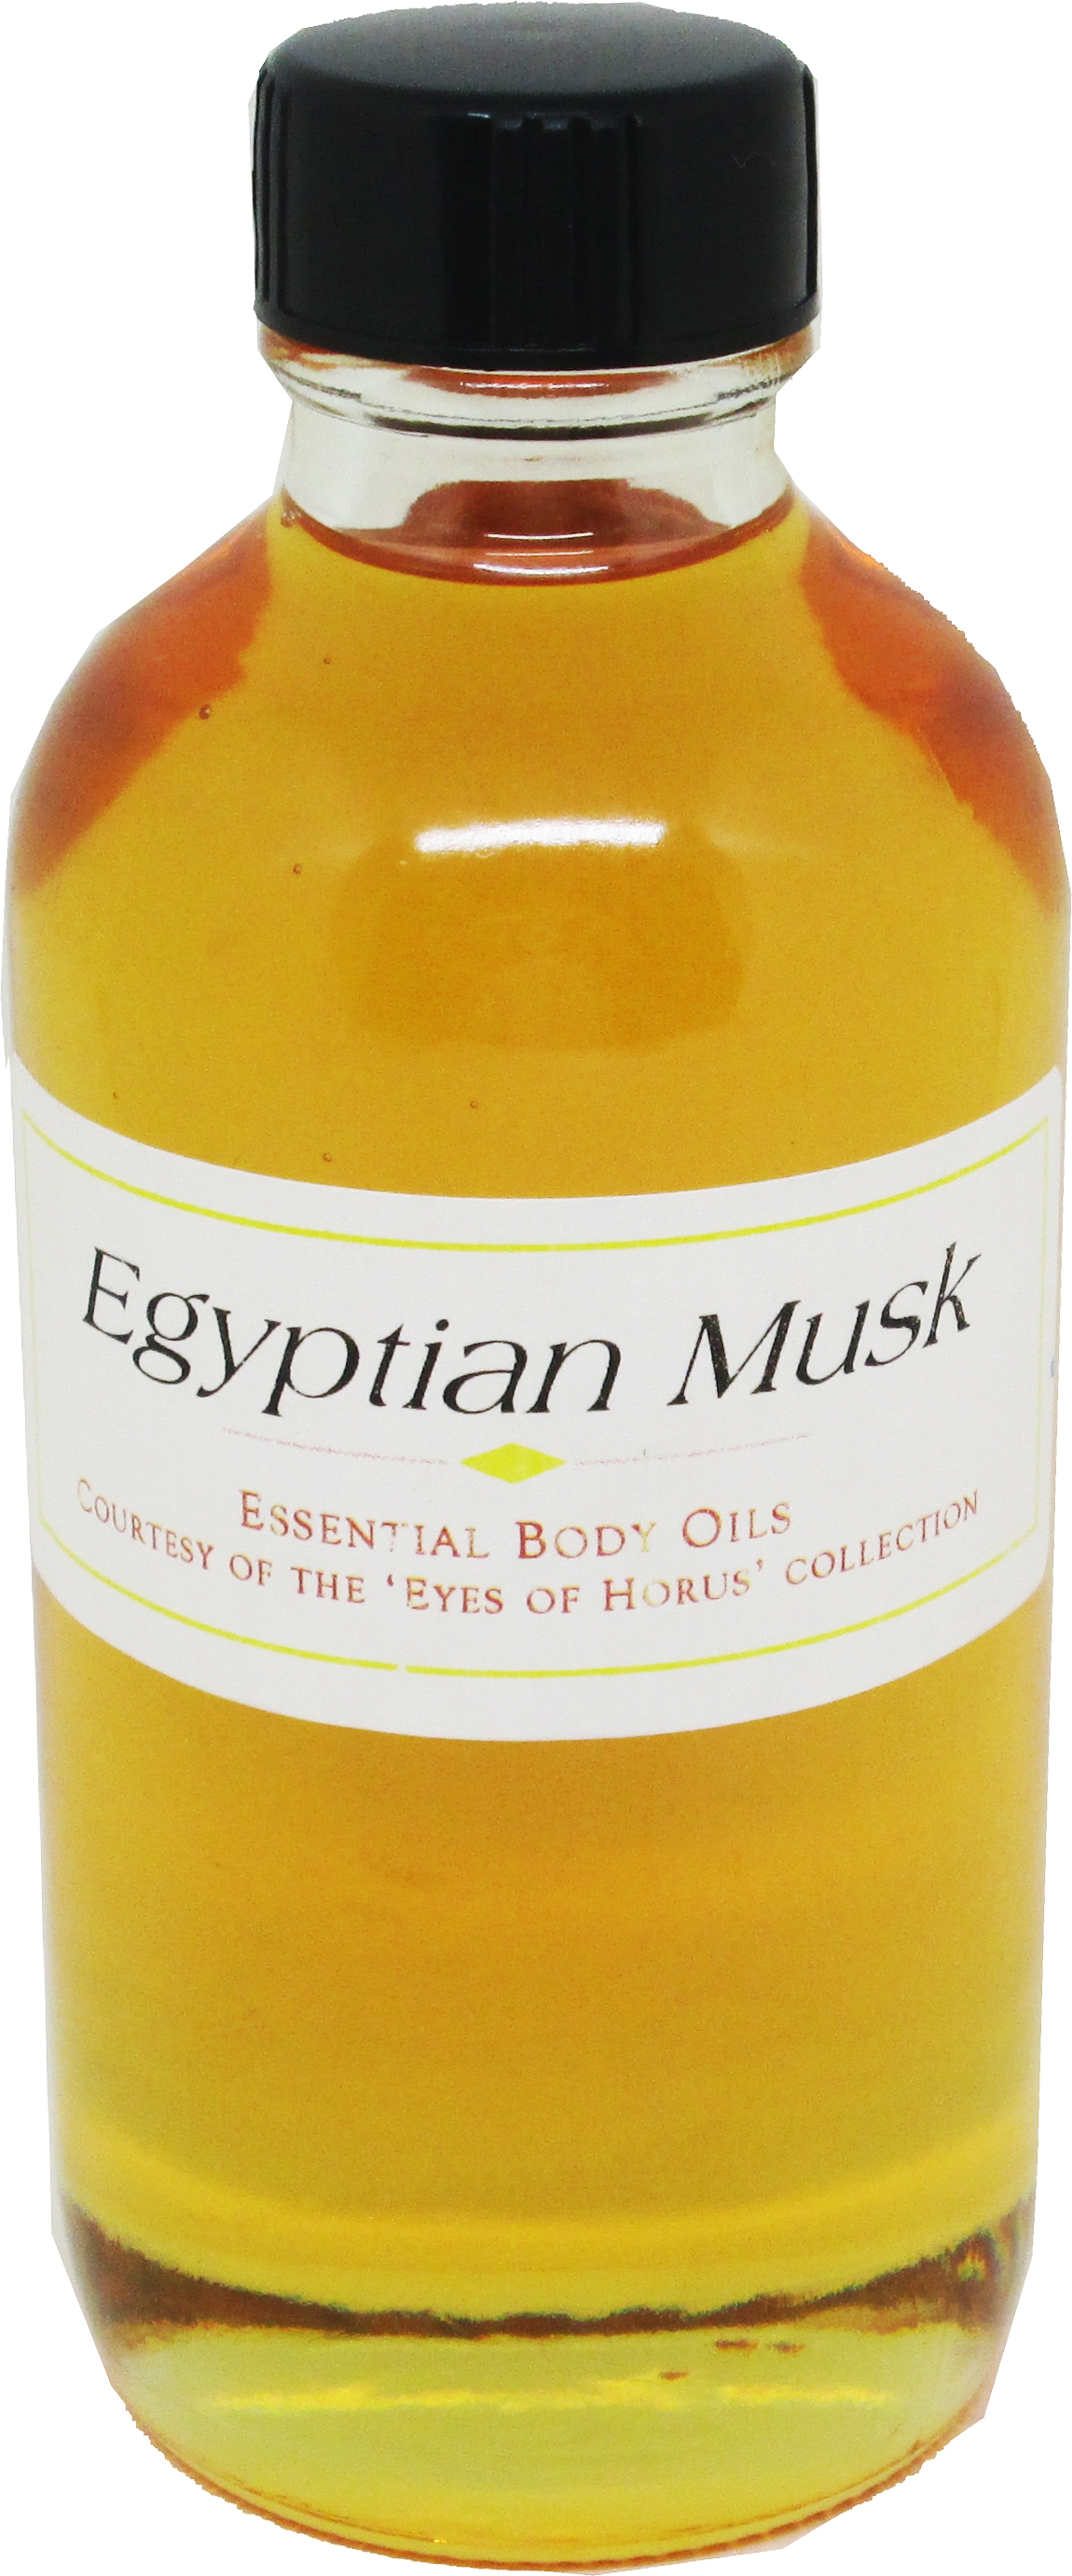 Egyptian Musk Yellow Fragrance Body Oil 100% Pure 